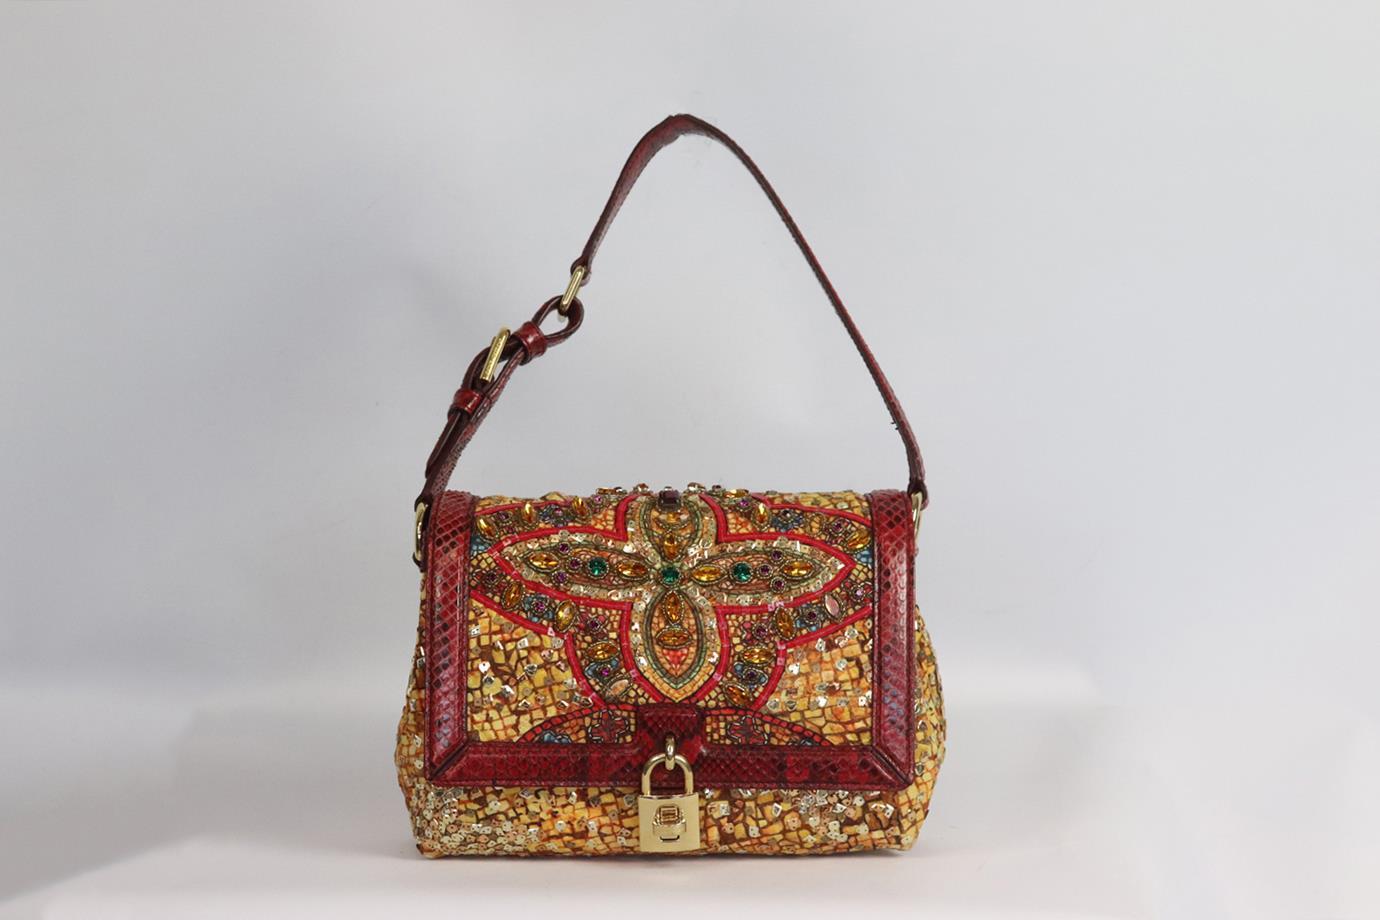 Dolce & Gabbana Miss Bonita embellished snakeskin trimmed brocade shoulder bag. Made yellow and red brocade in a stained glass window design with crystal embellishment and snakeskin trim, it comes with gold hardware and three large internal